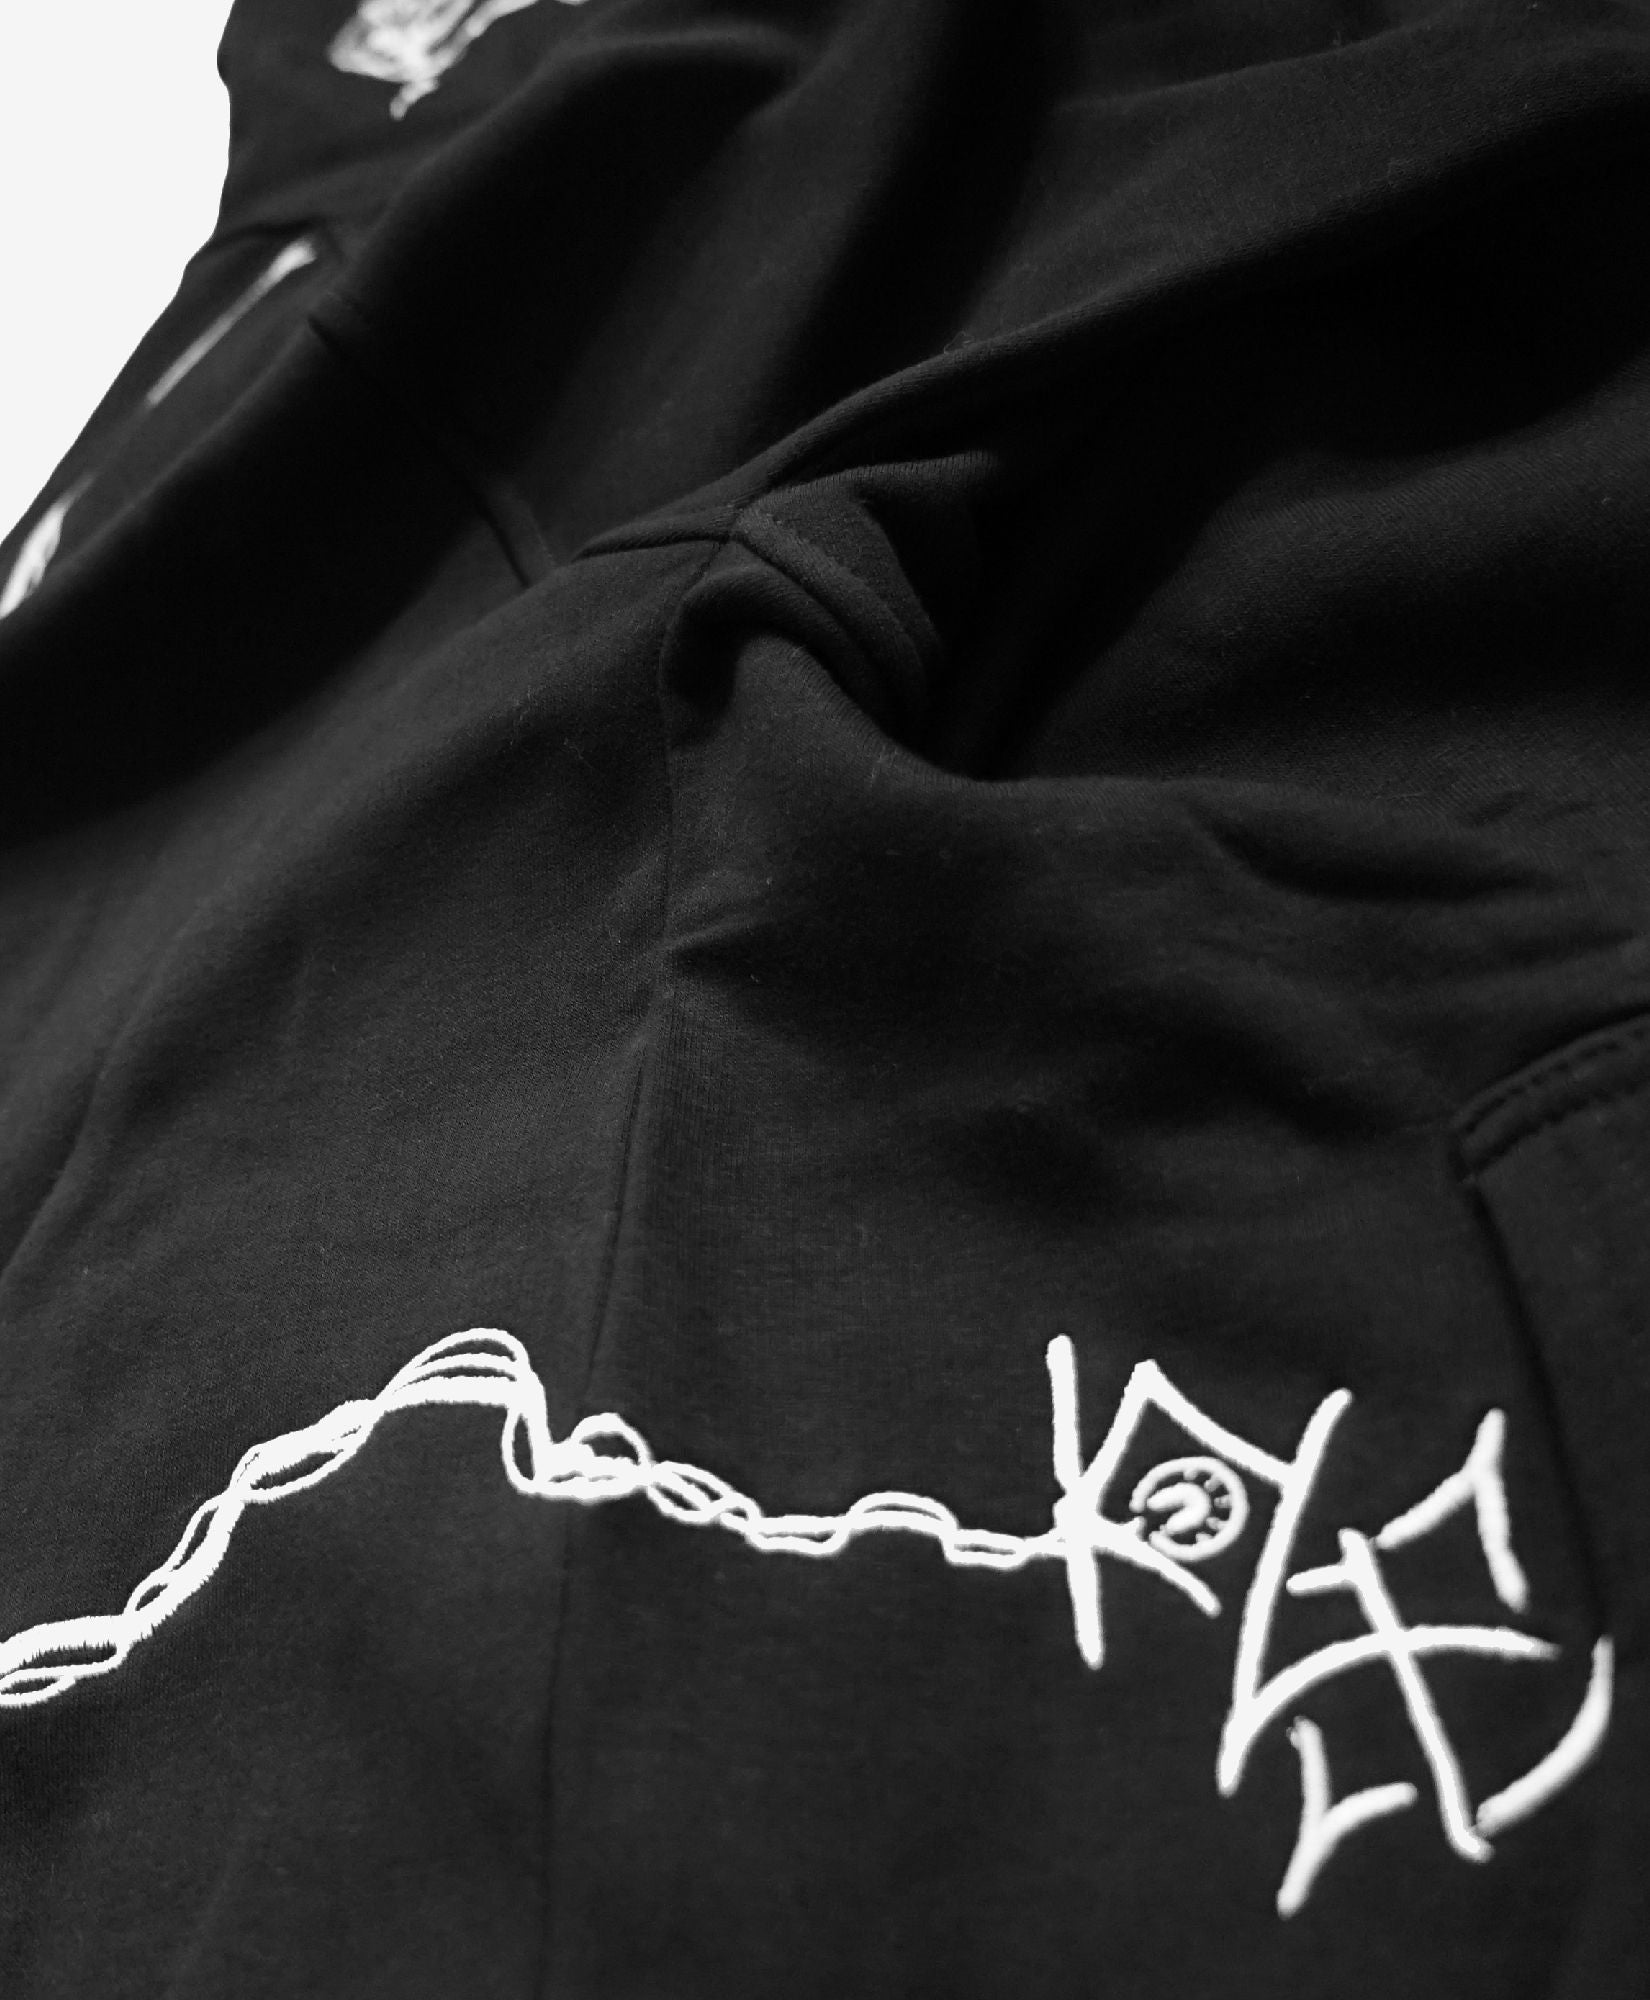 Embroidered art on Cotton Black Hoodie / Stitched Hoody of Kobe Bryant